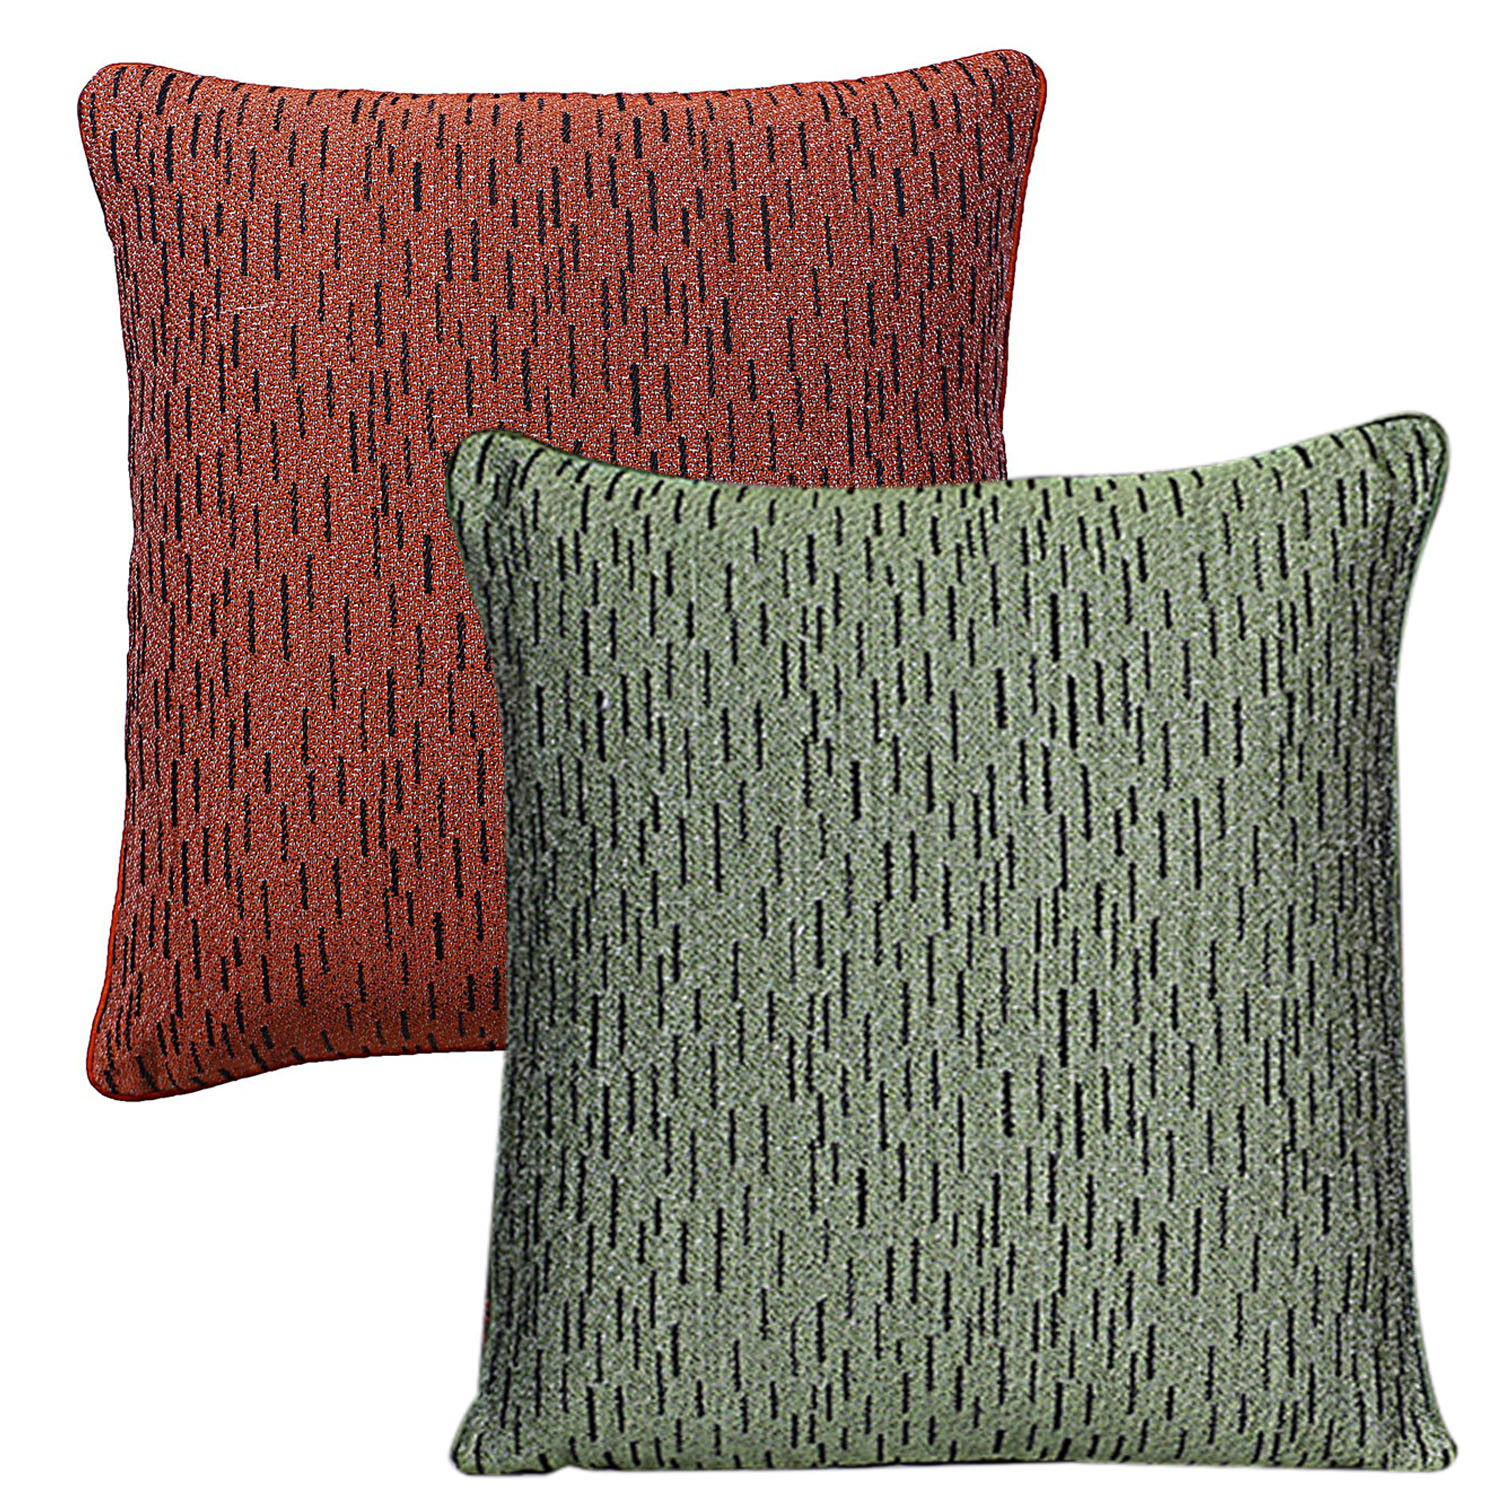 Kuber Industries Strips Print Cushion Cover|Ractangle Cushion Covers|Sofa Cushion Covers|Cushion Covers 16 inch x 16 inch|Cushion Cover Set of 5 (Multicolor)